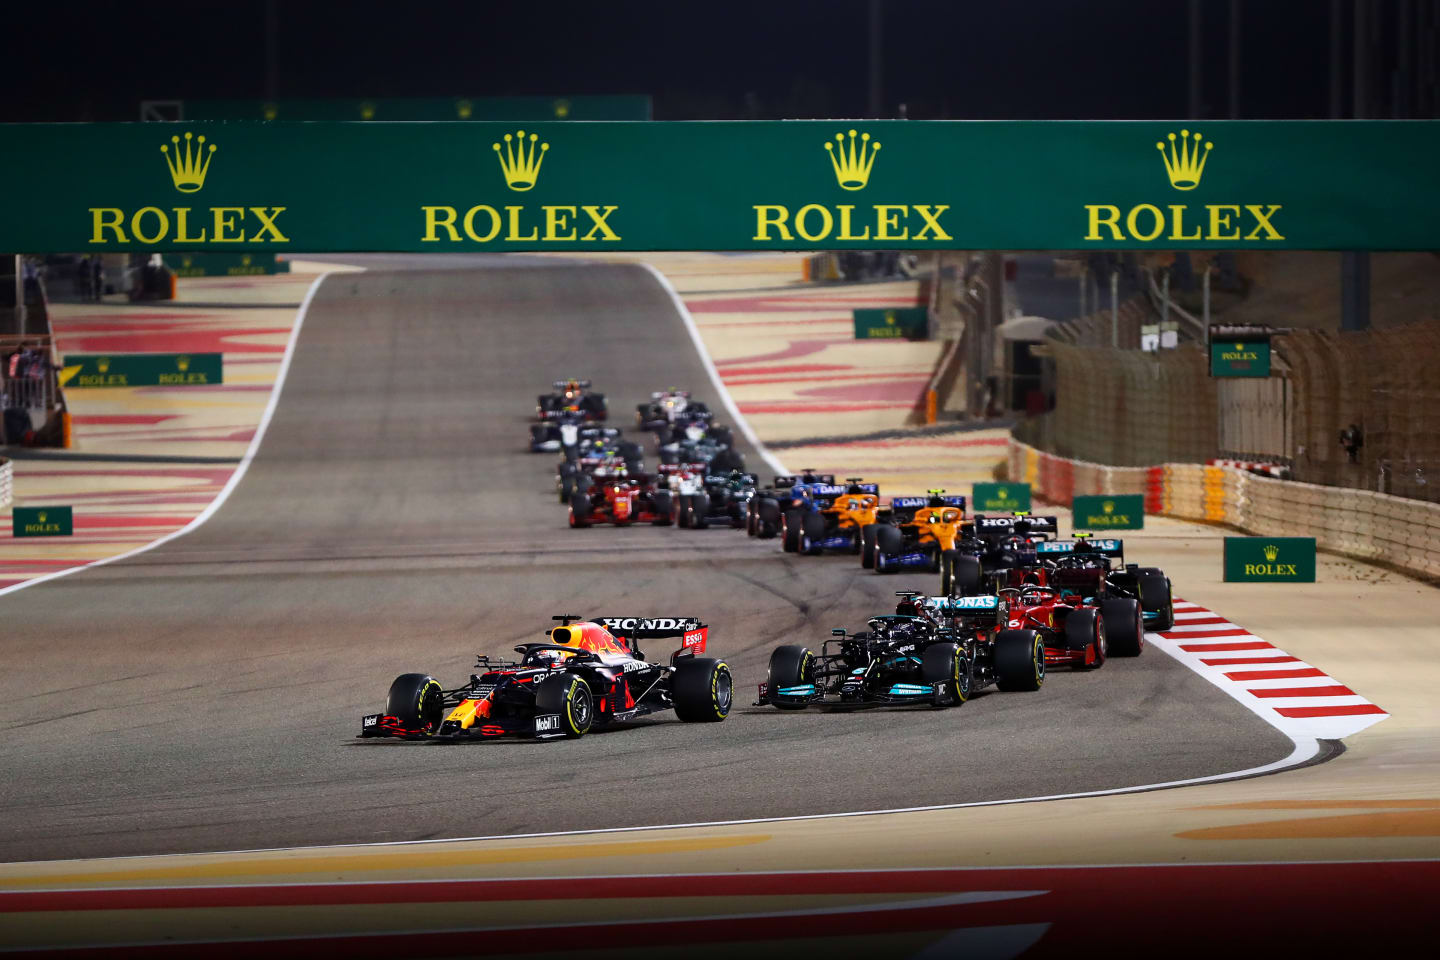 BAHRAIN, BAHRAIN - MARCH 28:  Max Verstappen of the Netherlands driving the (33) Red Bull Racing RB16B Honda leads Lewis Hamilton of Great Britain driving the (44) Mercedes AMG Petronas F1 Team Mercedes W12 and Charles Leclerc of Monaco driving the (16) Scuderia Ferrari SF21  during the F1 Grand Prix of Bahrain at Bahrain International Circuit on March 28, 2021 in Bahrain, Bahrain. (Photo by Dan Istitene - Formula 1/Formula 1 via Getty Images)